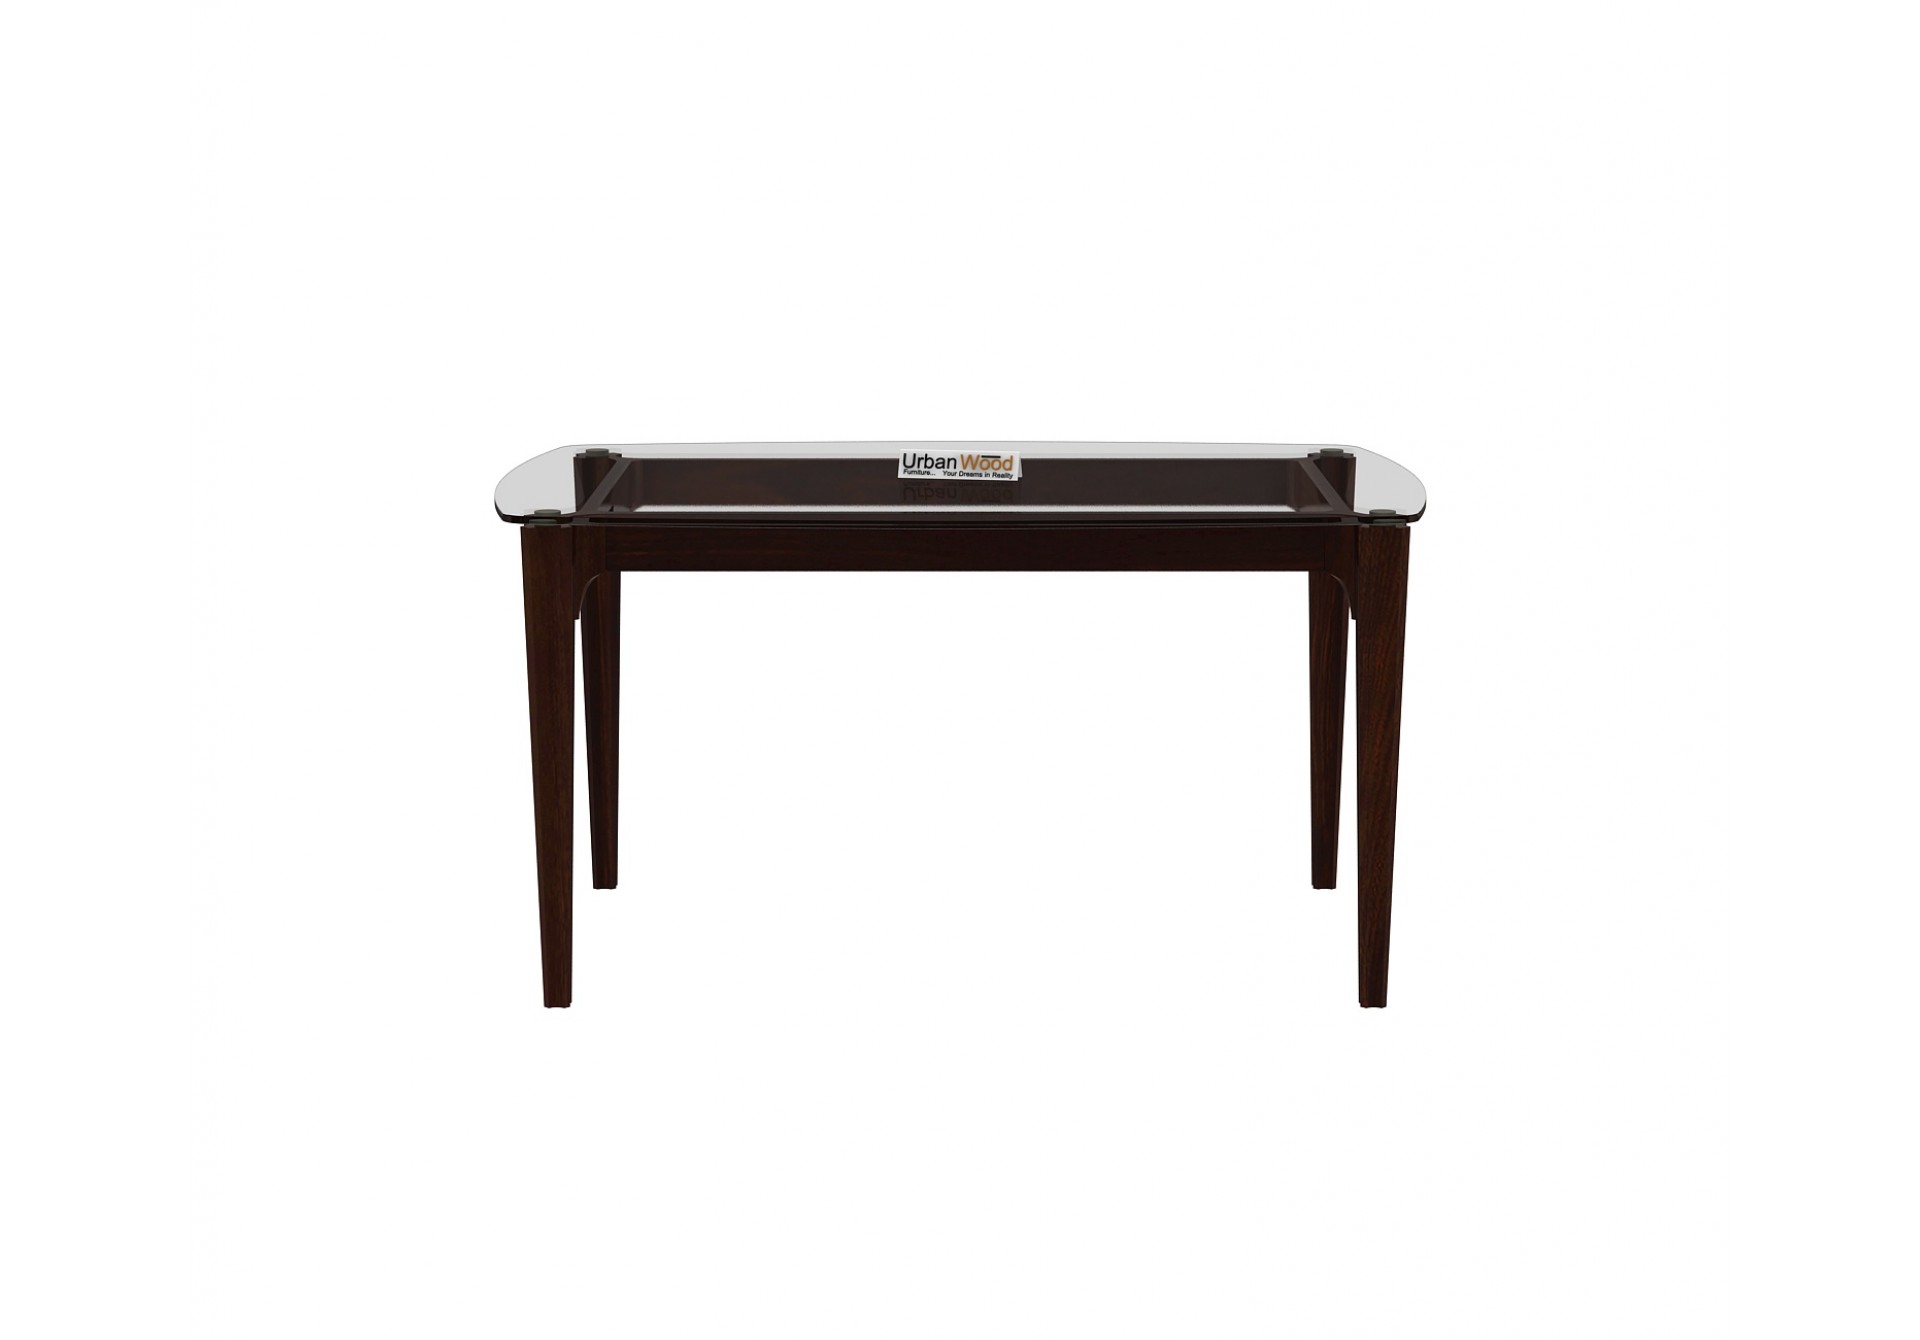 Quipo 4-Seater Dining Table (Walnut Finish)